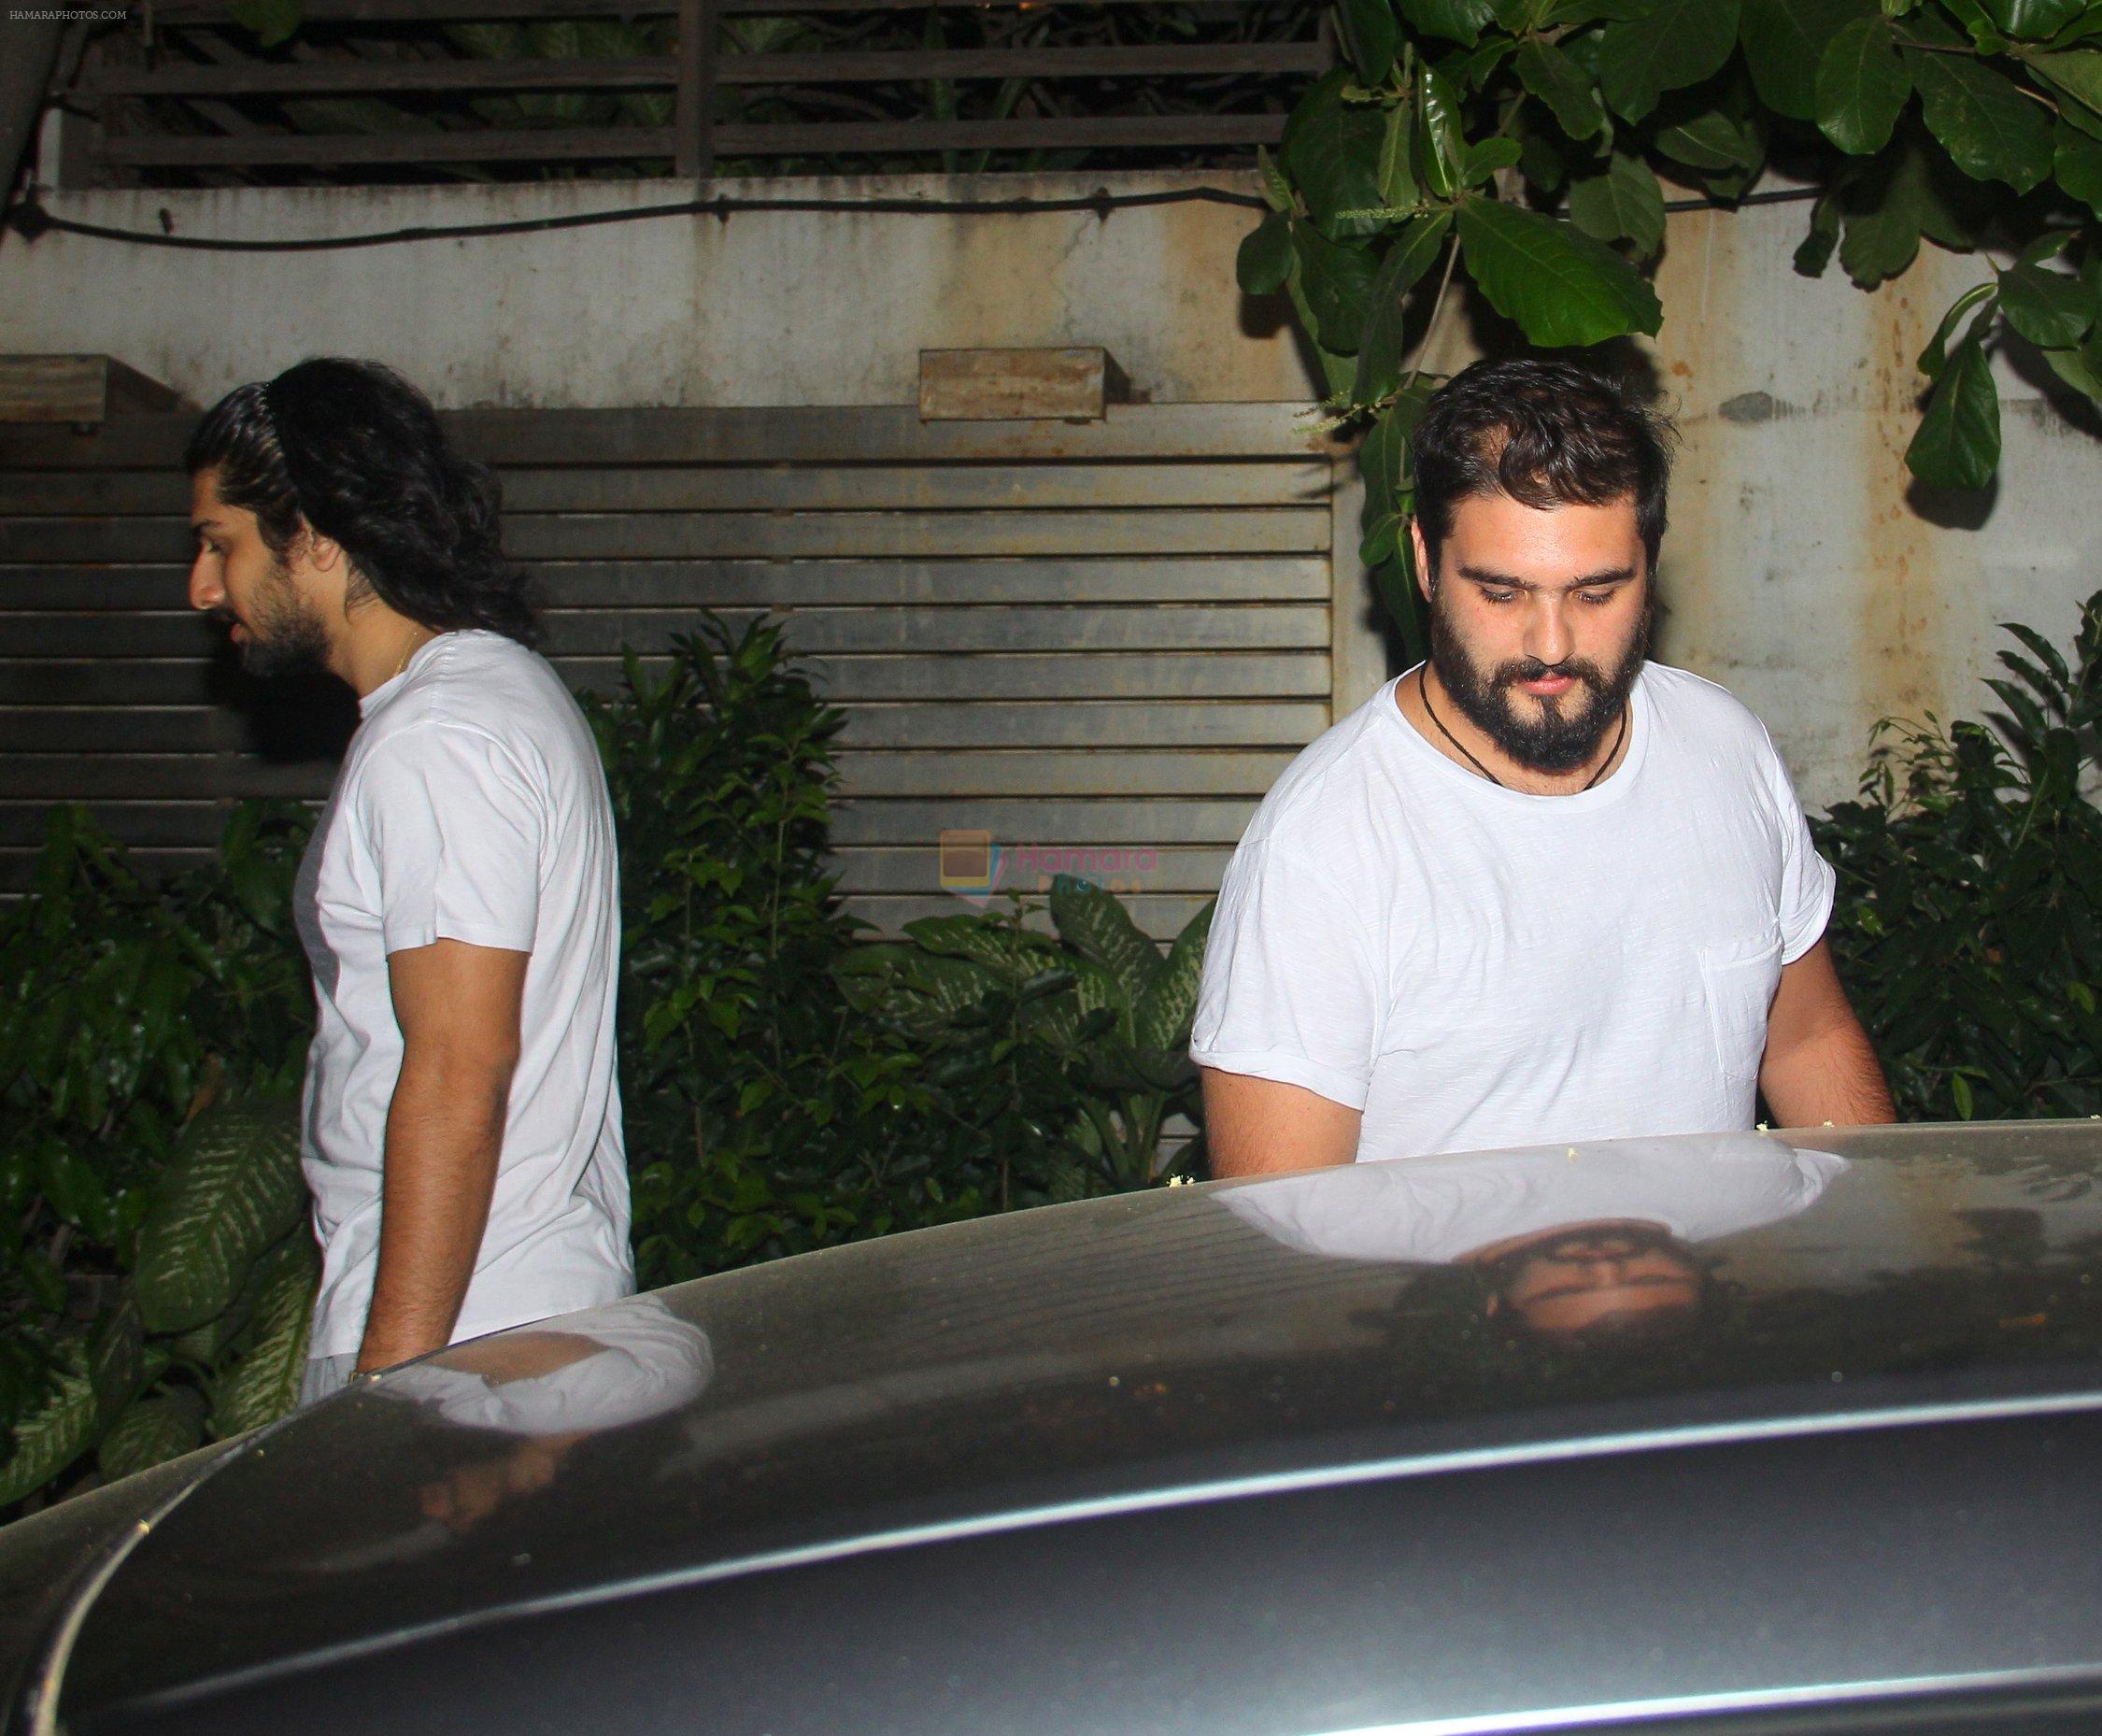 at Zoya Akhtar's home on 10th March 2016